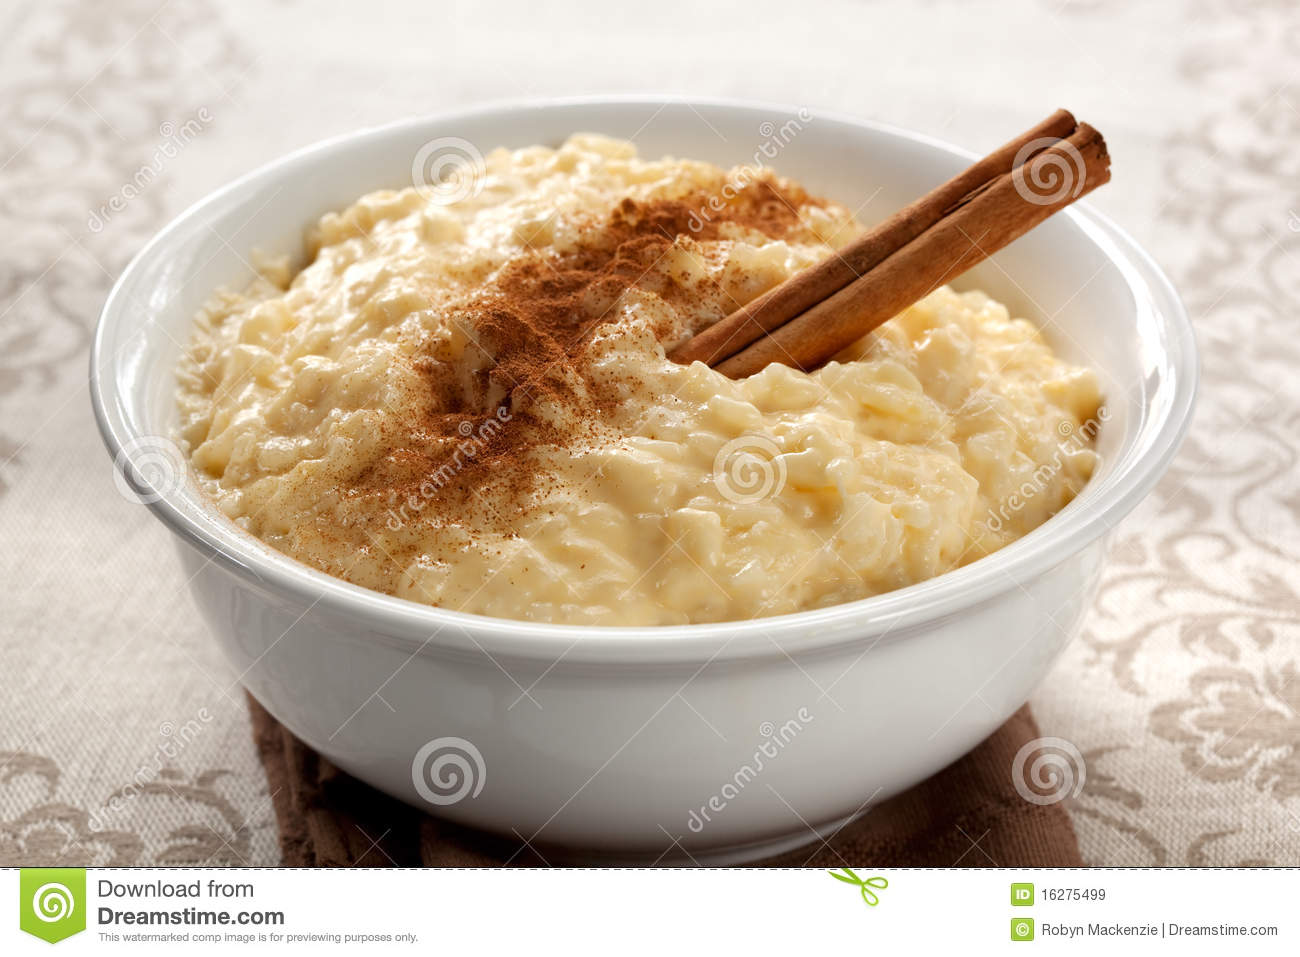 Rice Pudding With Cinnamon A Simple Nutritious Dessert Made From Rice